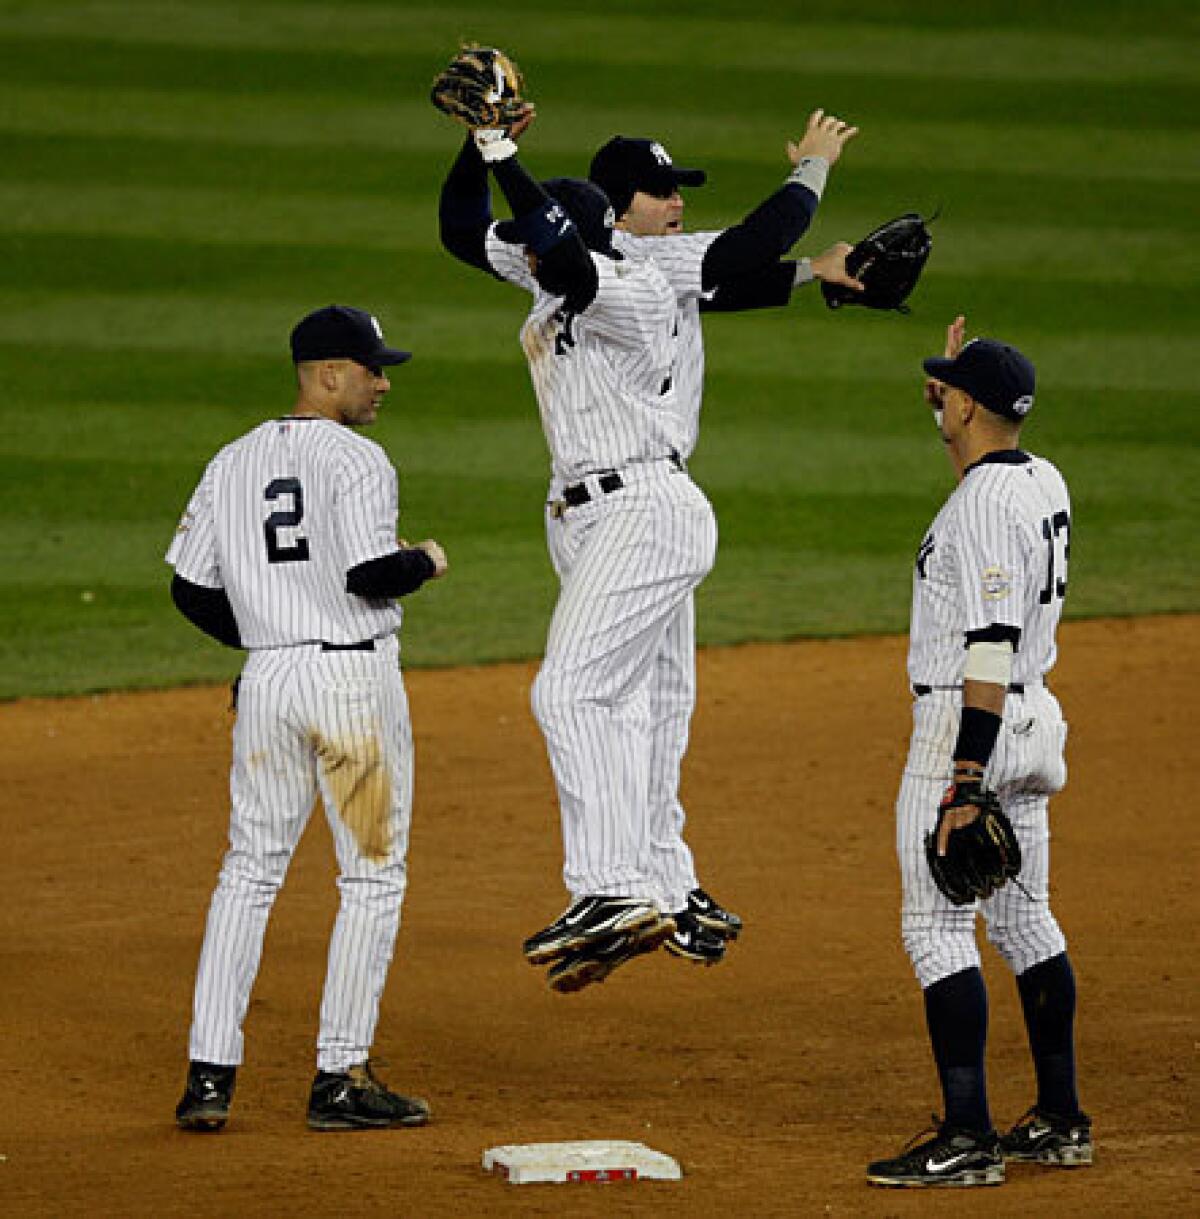 The New York Yankees celebrate their 4-1 victory over the Angels in Game 1 of the American League Championship Series on Friday night at Yankee Stadium.